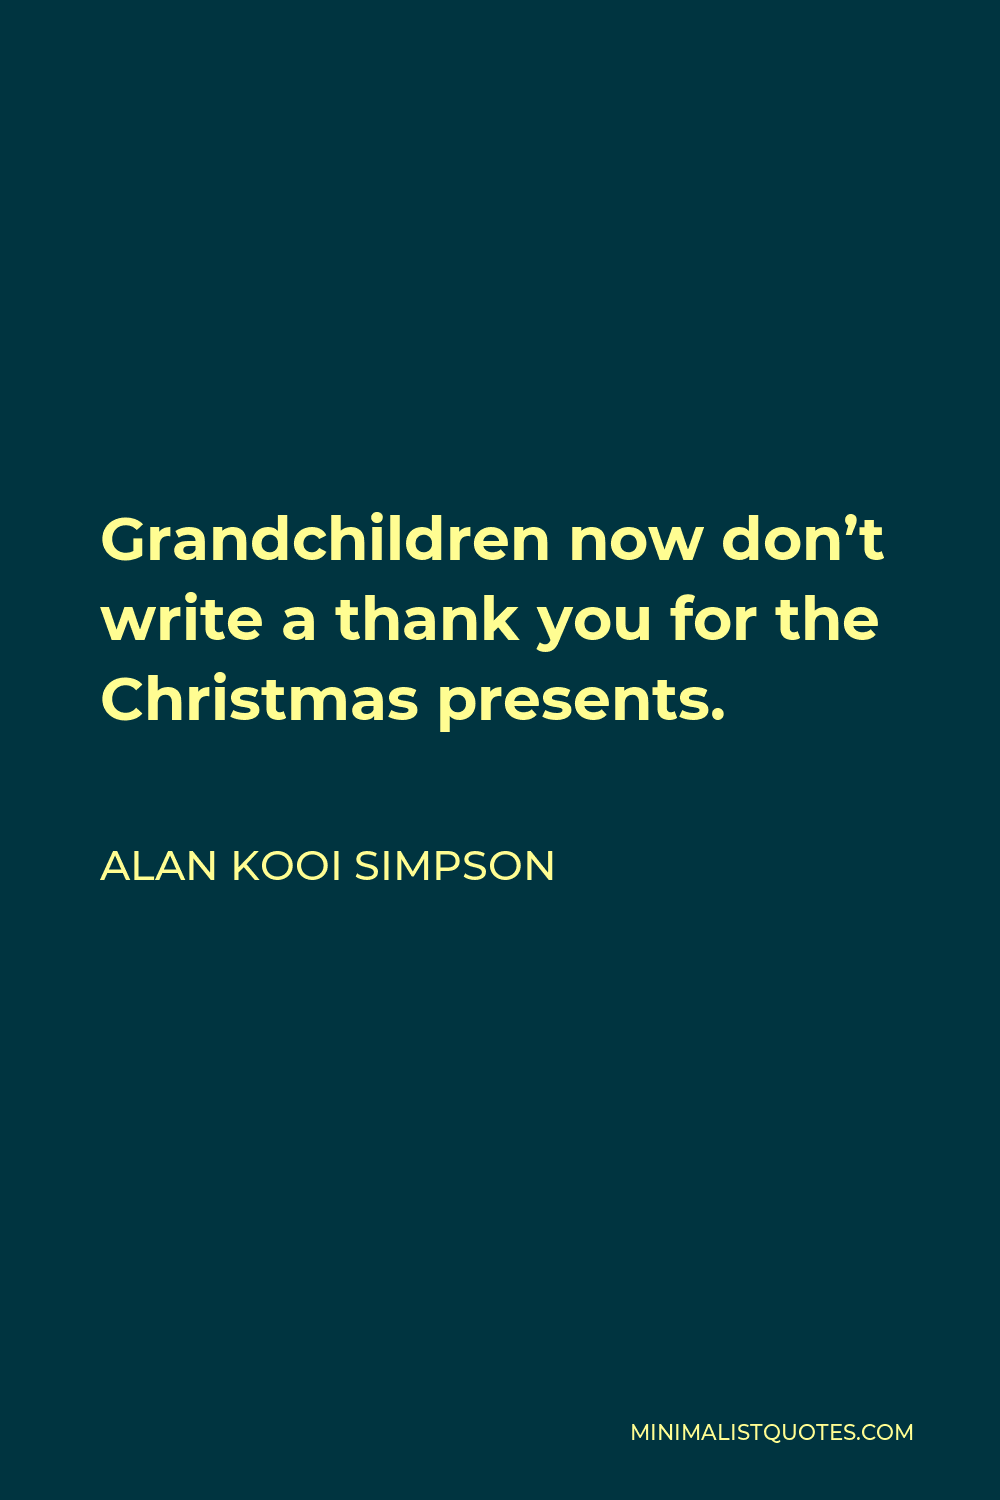 Alan Kooi Simpson Quote - Grandchildren now don’t write a thank you for the Christmas presents.